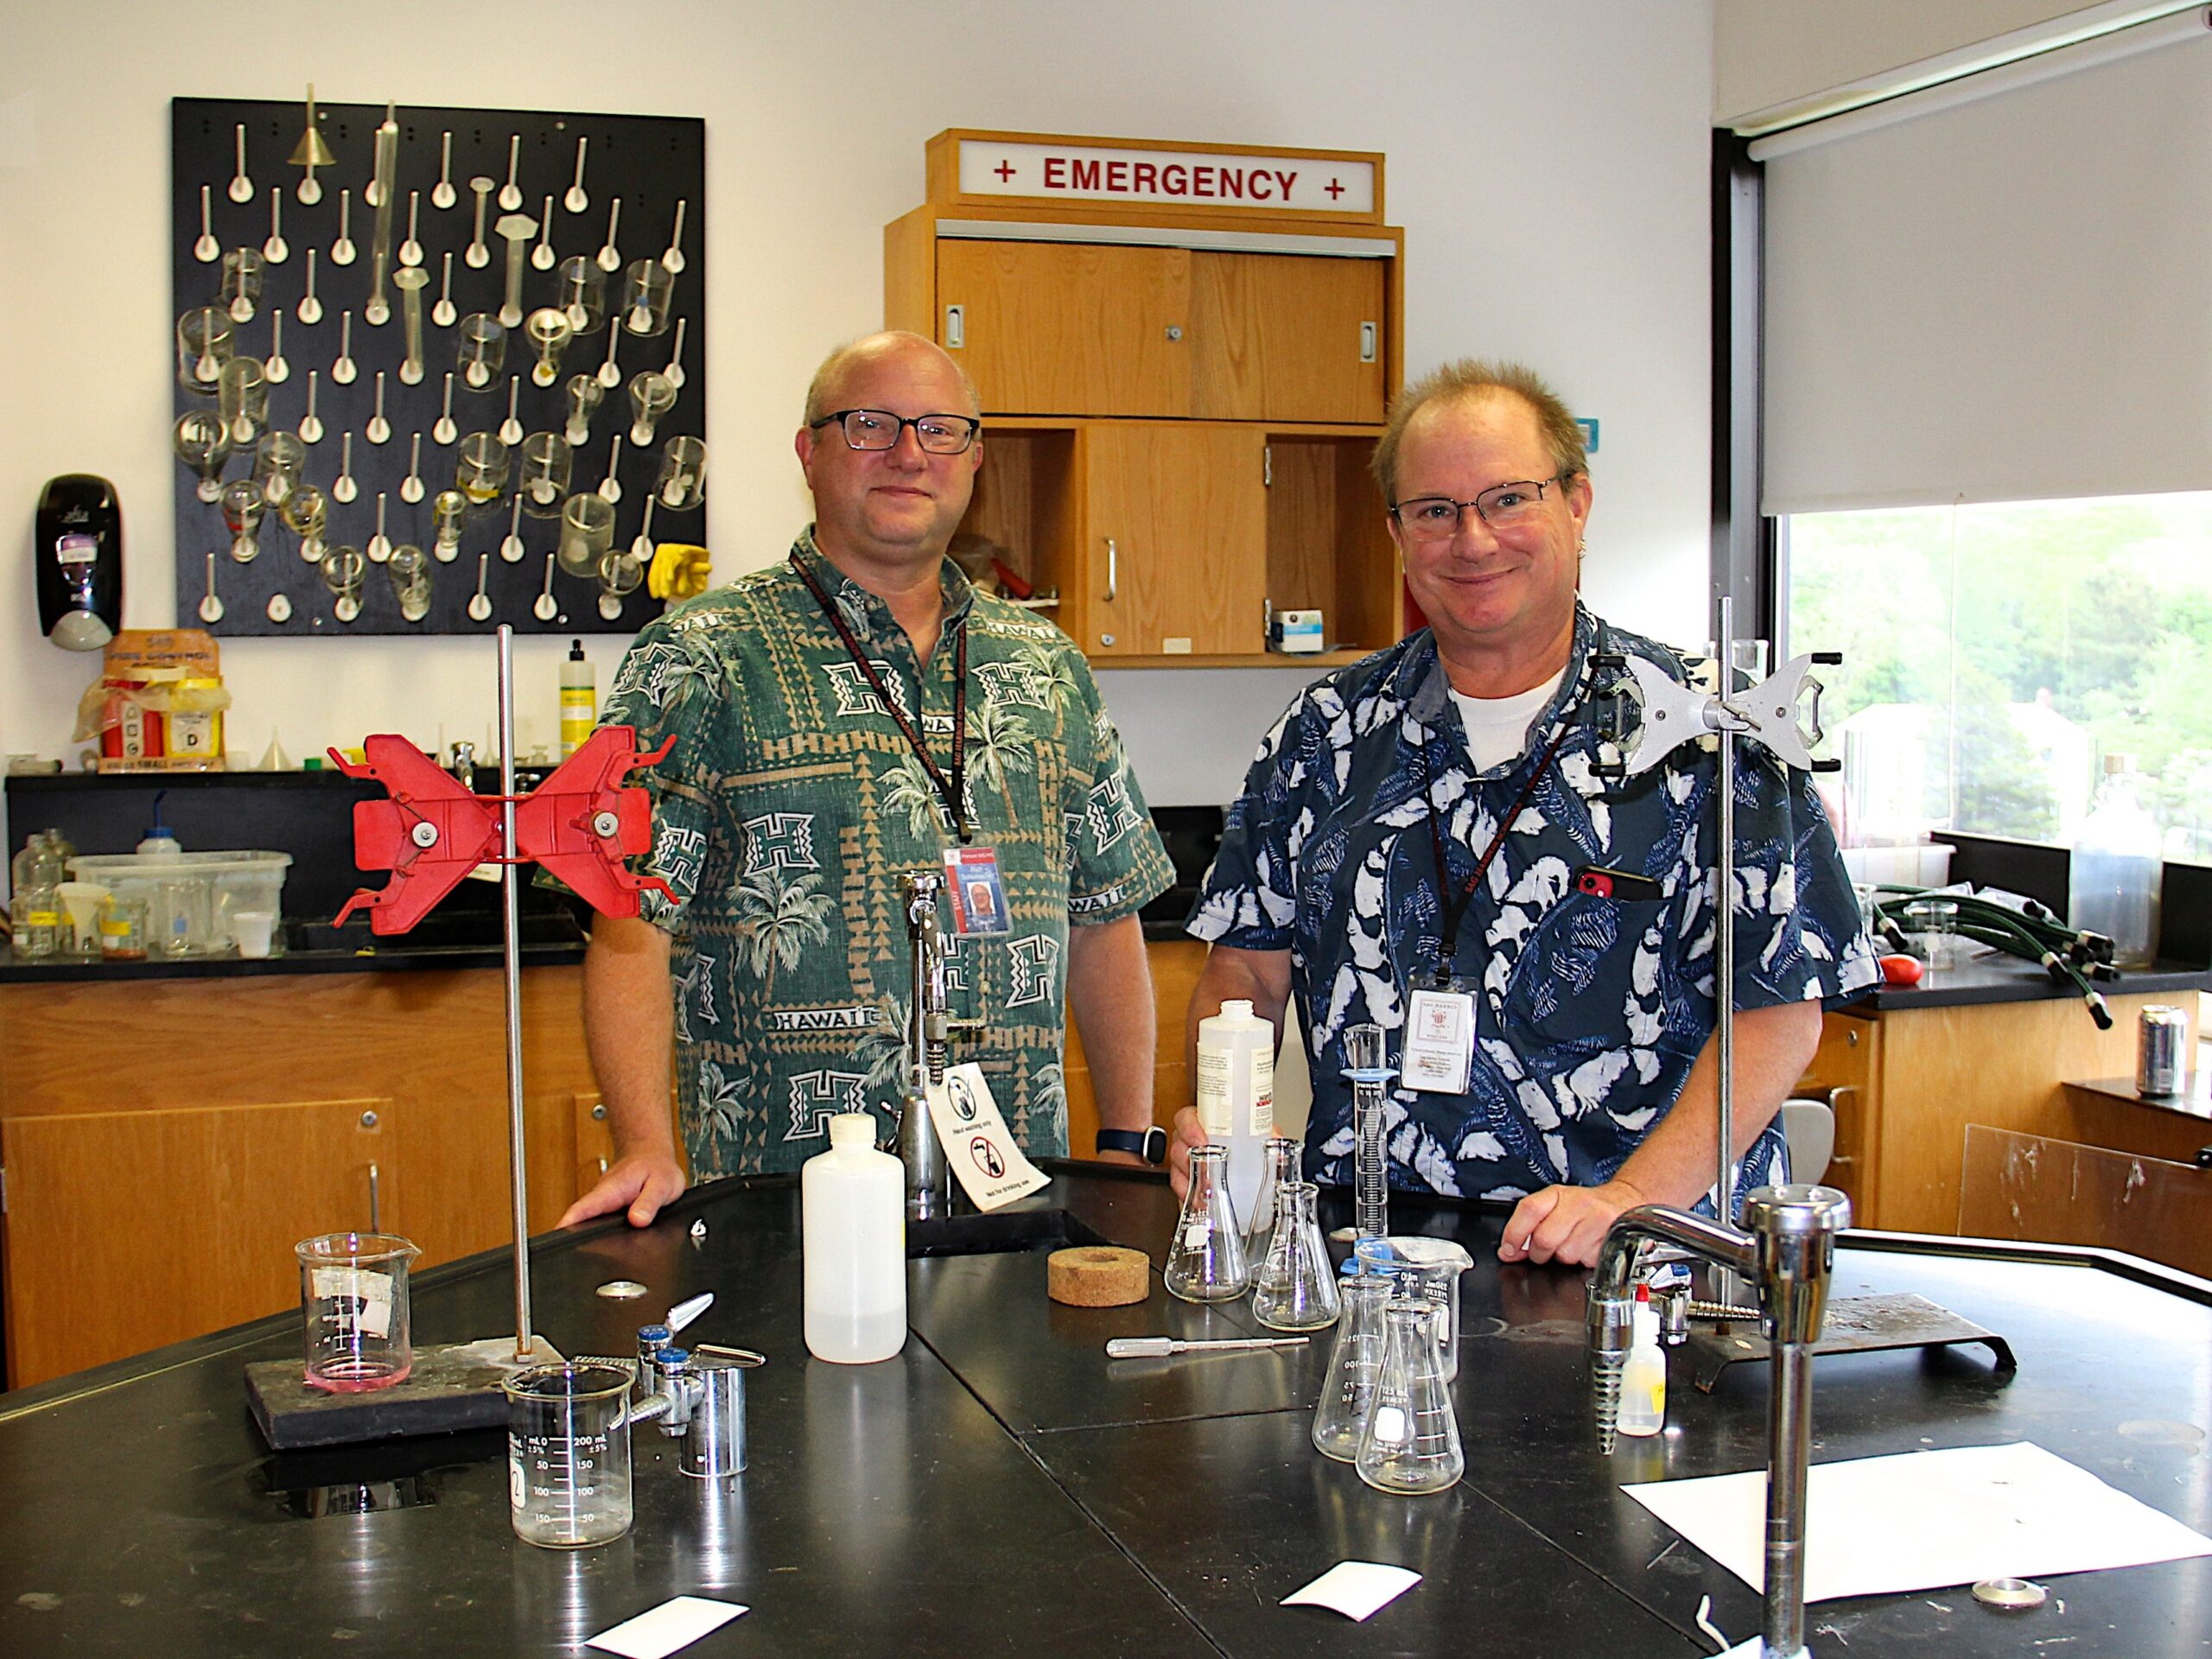 Robert Schumacher, left, and his brother Richard Schumacher. They are both science teachers at Pierson High School and have been working on a mold discovery over the past several years that is the subject of a cover story in an upcoming issue of the American Chemical Society Journal of Natural Products. KYRIL BROMLEY